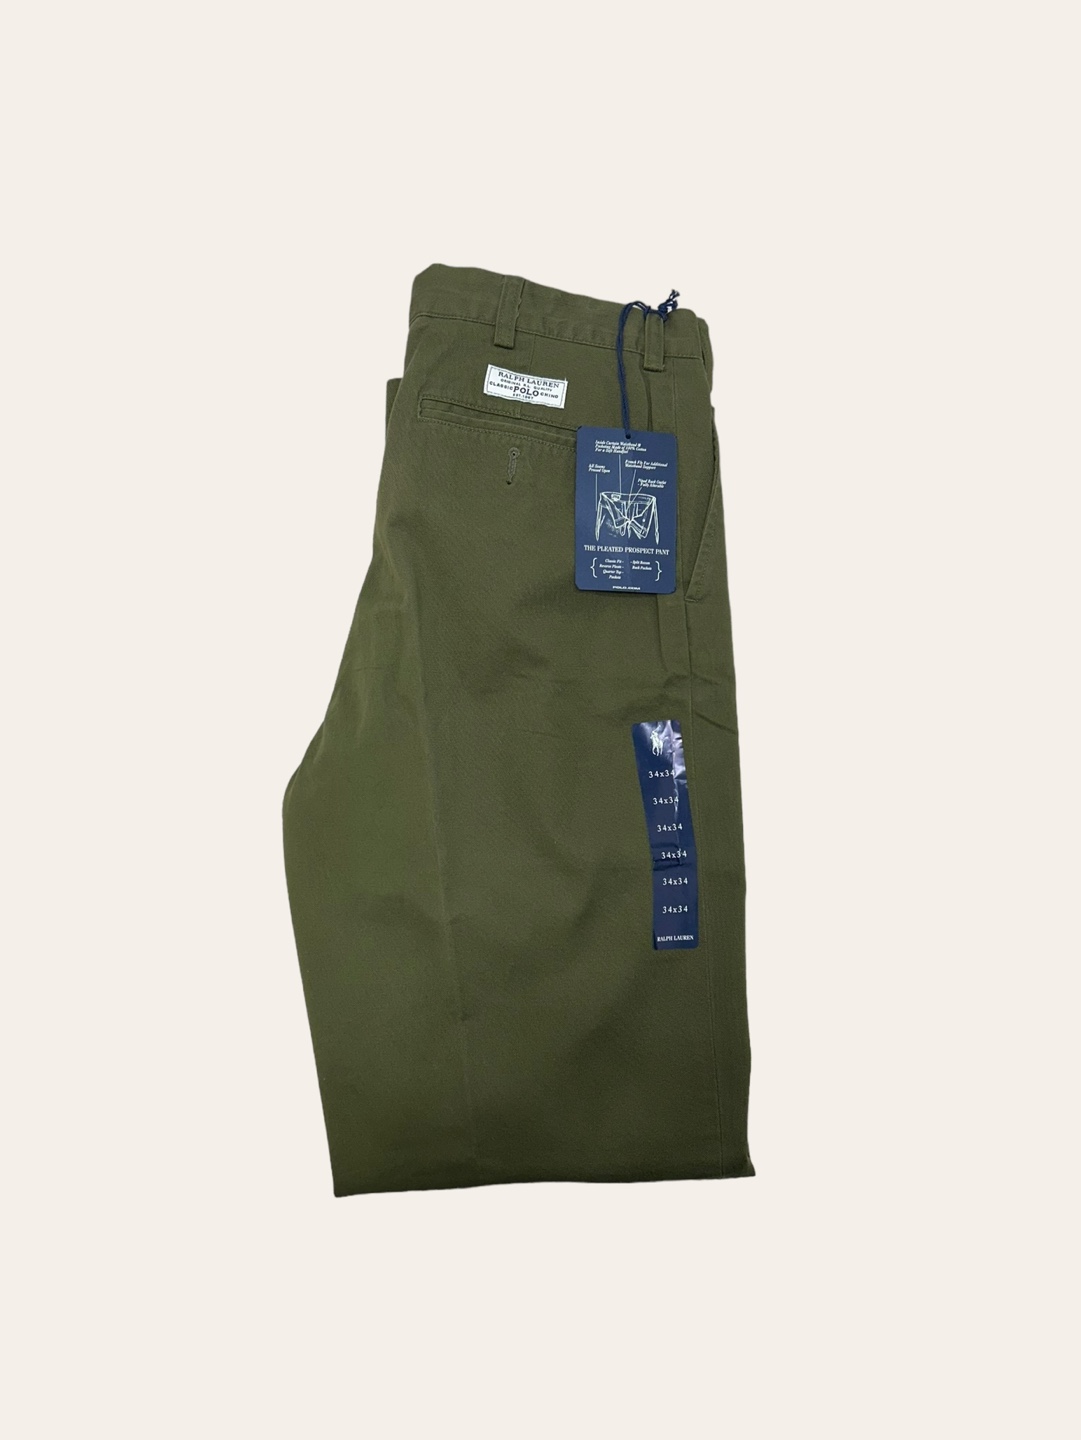 (New with tags)Polo ralph lauren khaki color classic chino pants 34x34